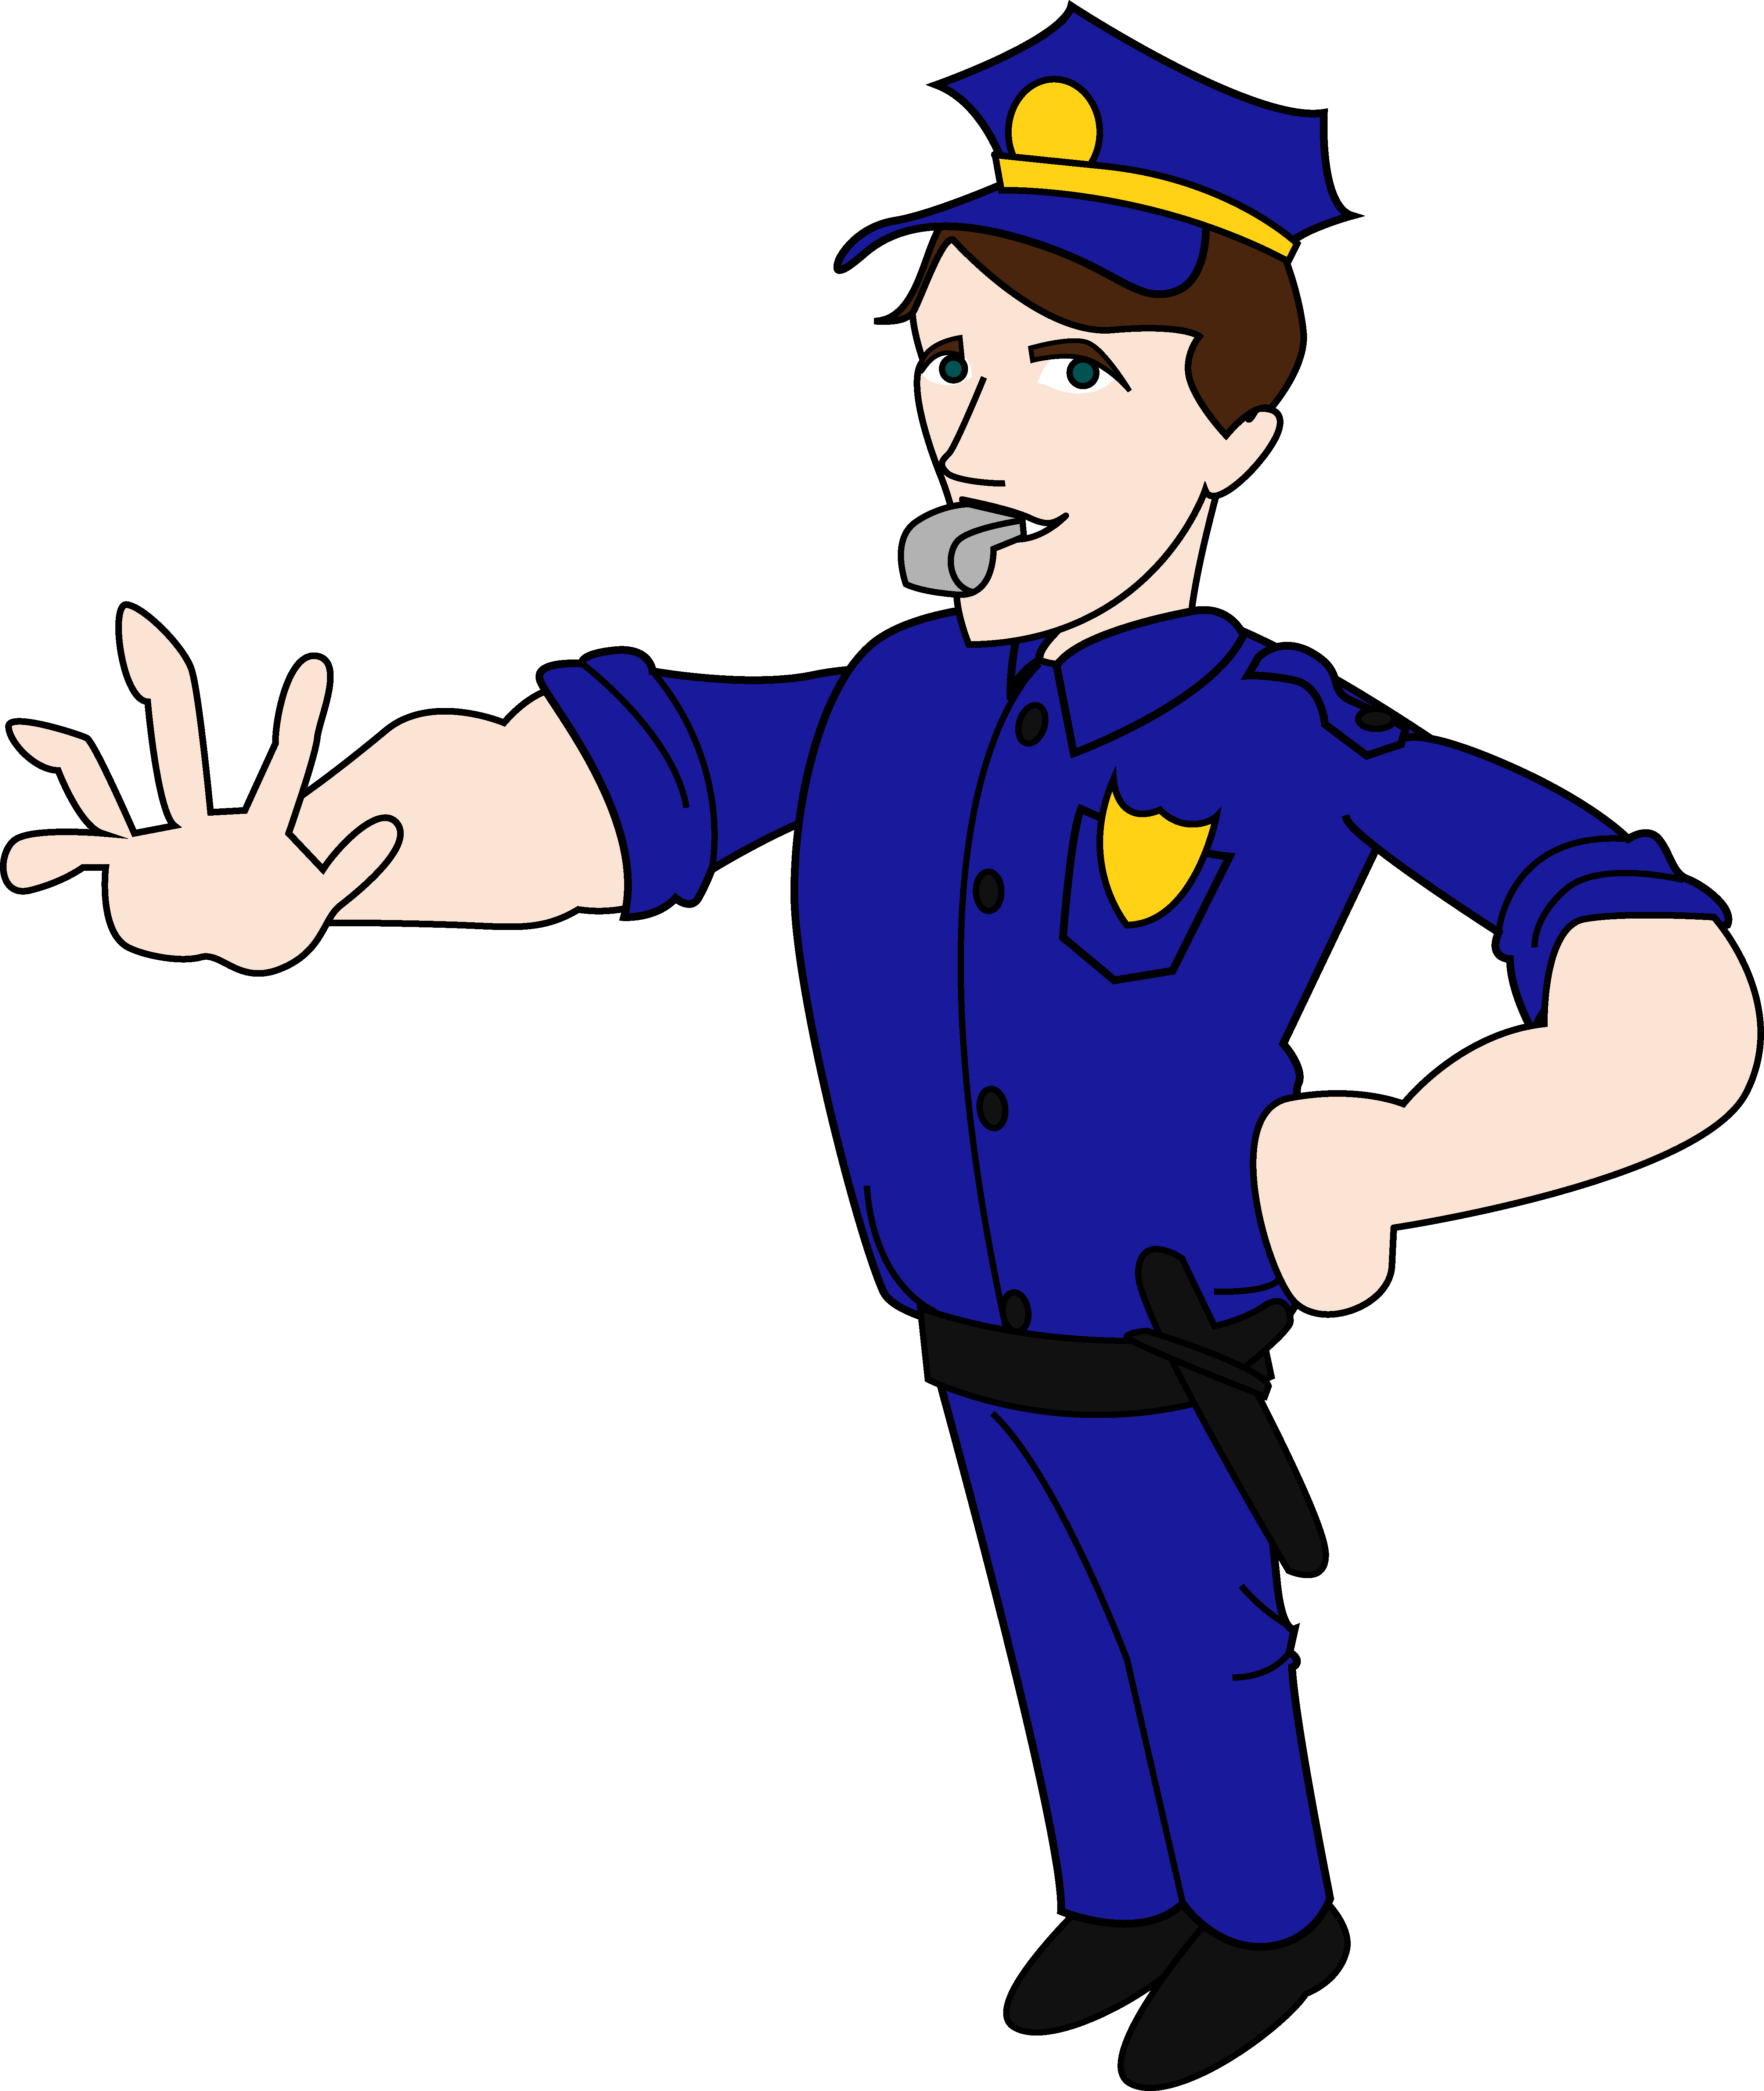  collection of images. Clipart man police officer